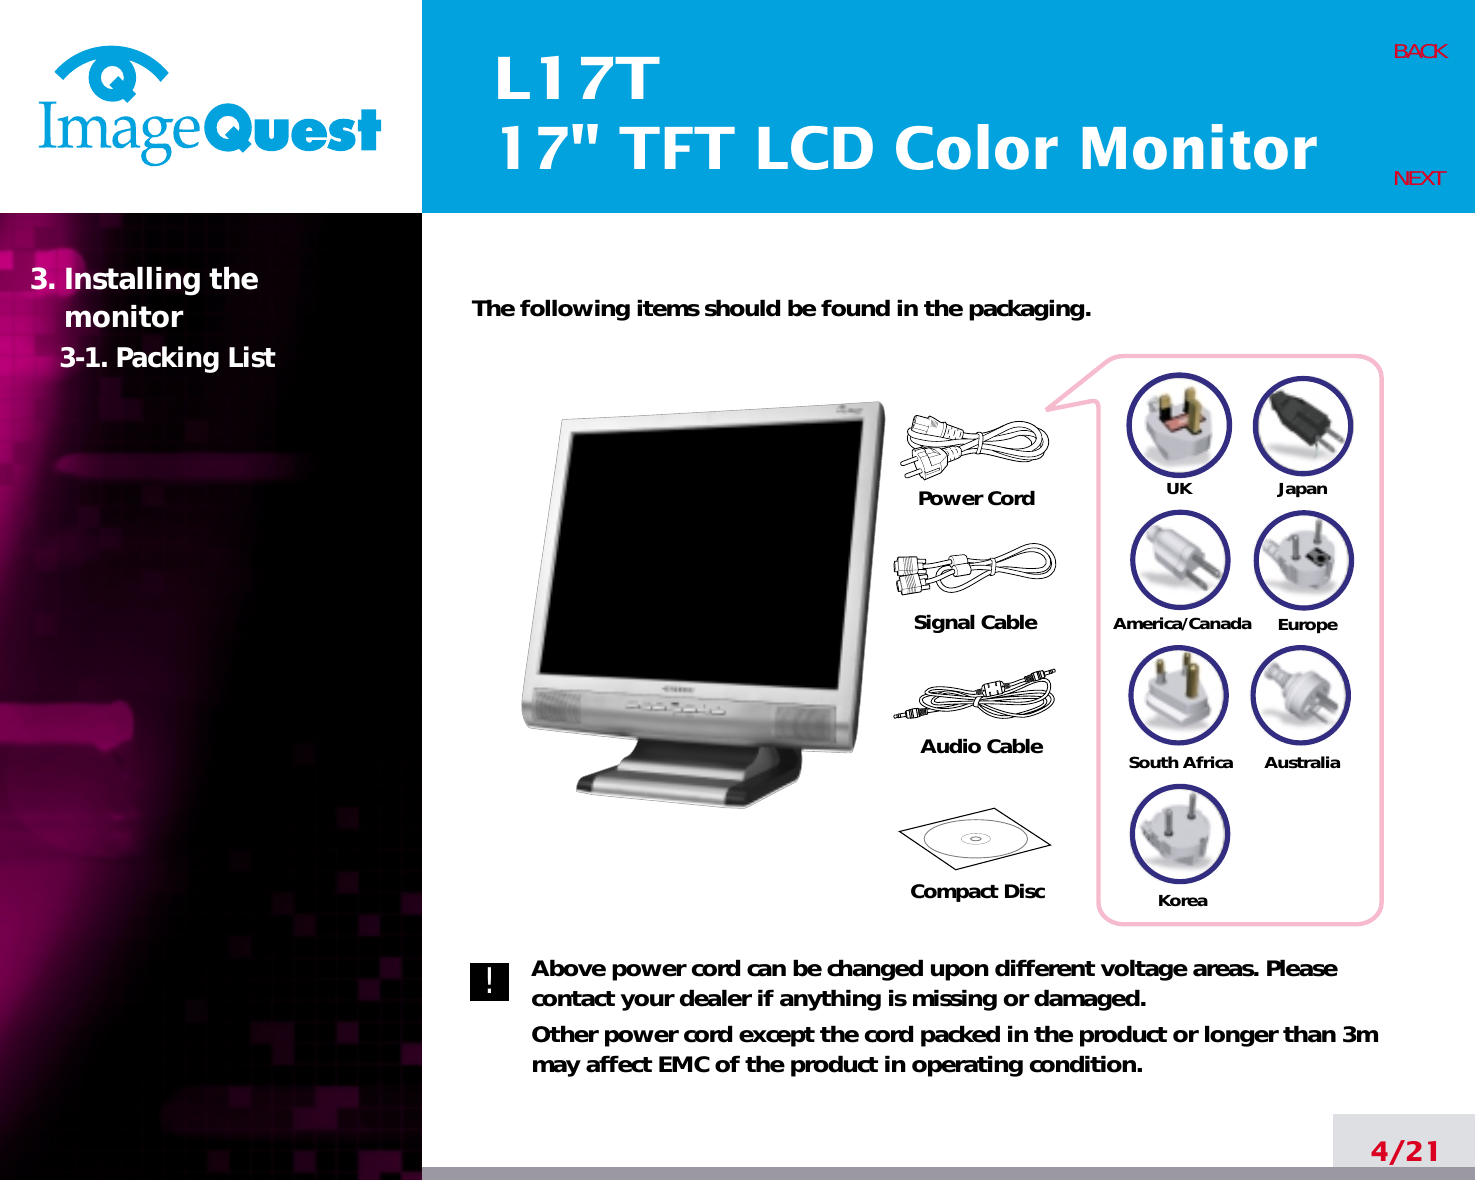 L17T17&quot; TFT LCD Color Monitor4/21BACKNEXTThe following items should be found in the packaging.Above power cord can be changed upon different voltage areas. Pleasecontact your dealer if anything is missing or damaged.Other power cord except the cord packed in the product or longer than 3mmay affect EMC of the product in operating condition.3. Installing the monitor3-1. Packing List!UKAmerica/CanadaJapanAustraliaKoreaEuropeSouth AfricaPower CordSignal CableAudio Cable Compact Disc